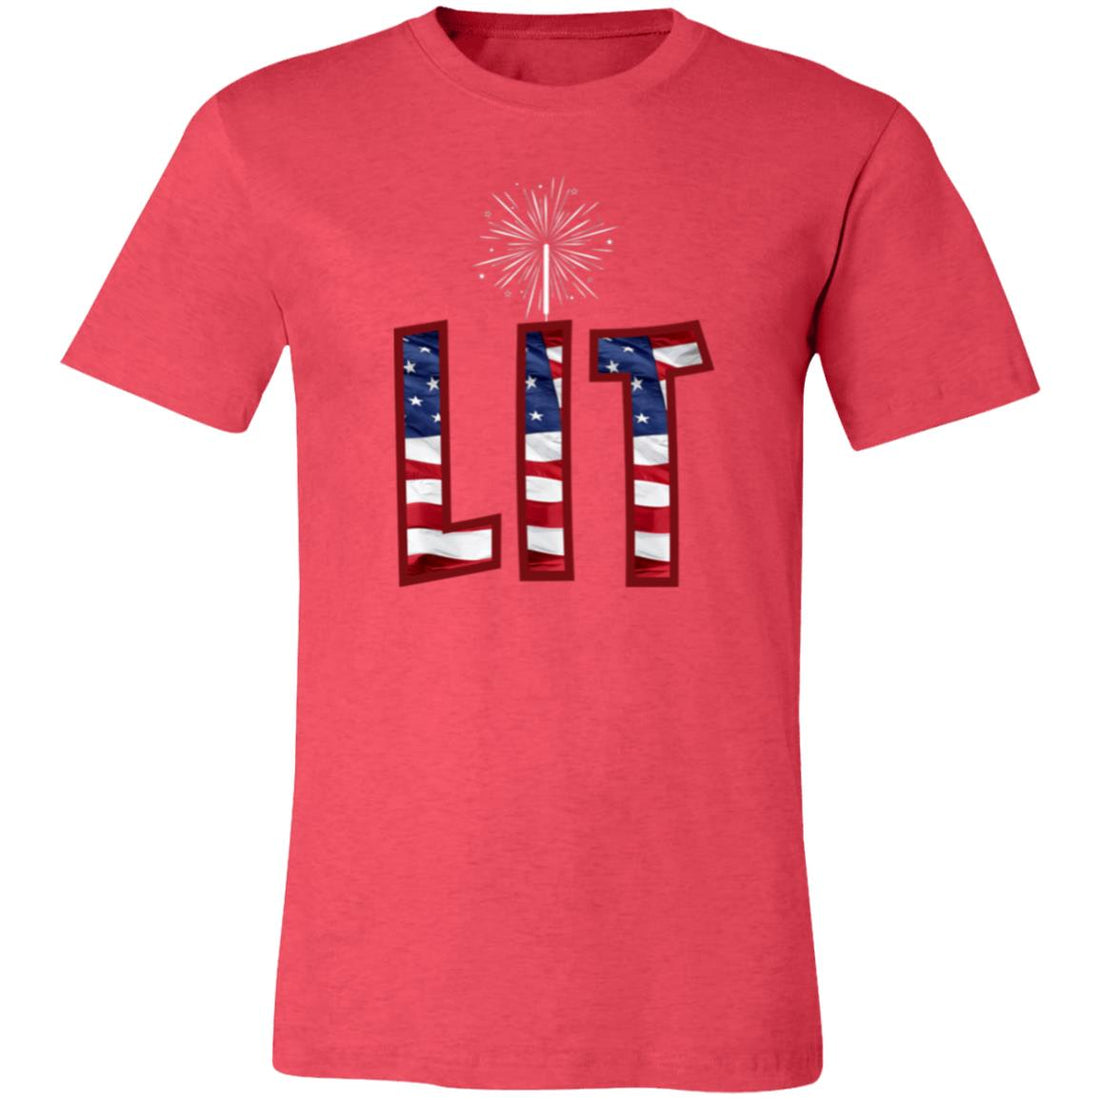 LIT on the 4th T-Shirt - T-Shirts - Positively Sassy - LIT on the 4th T-Shirt